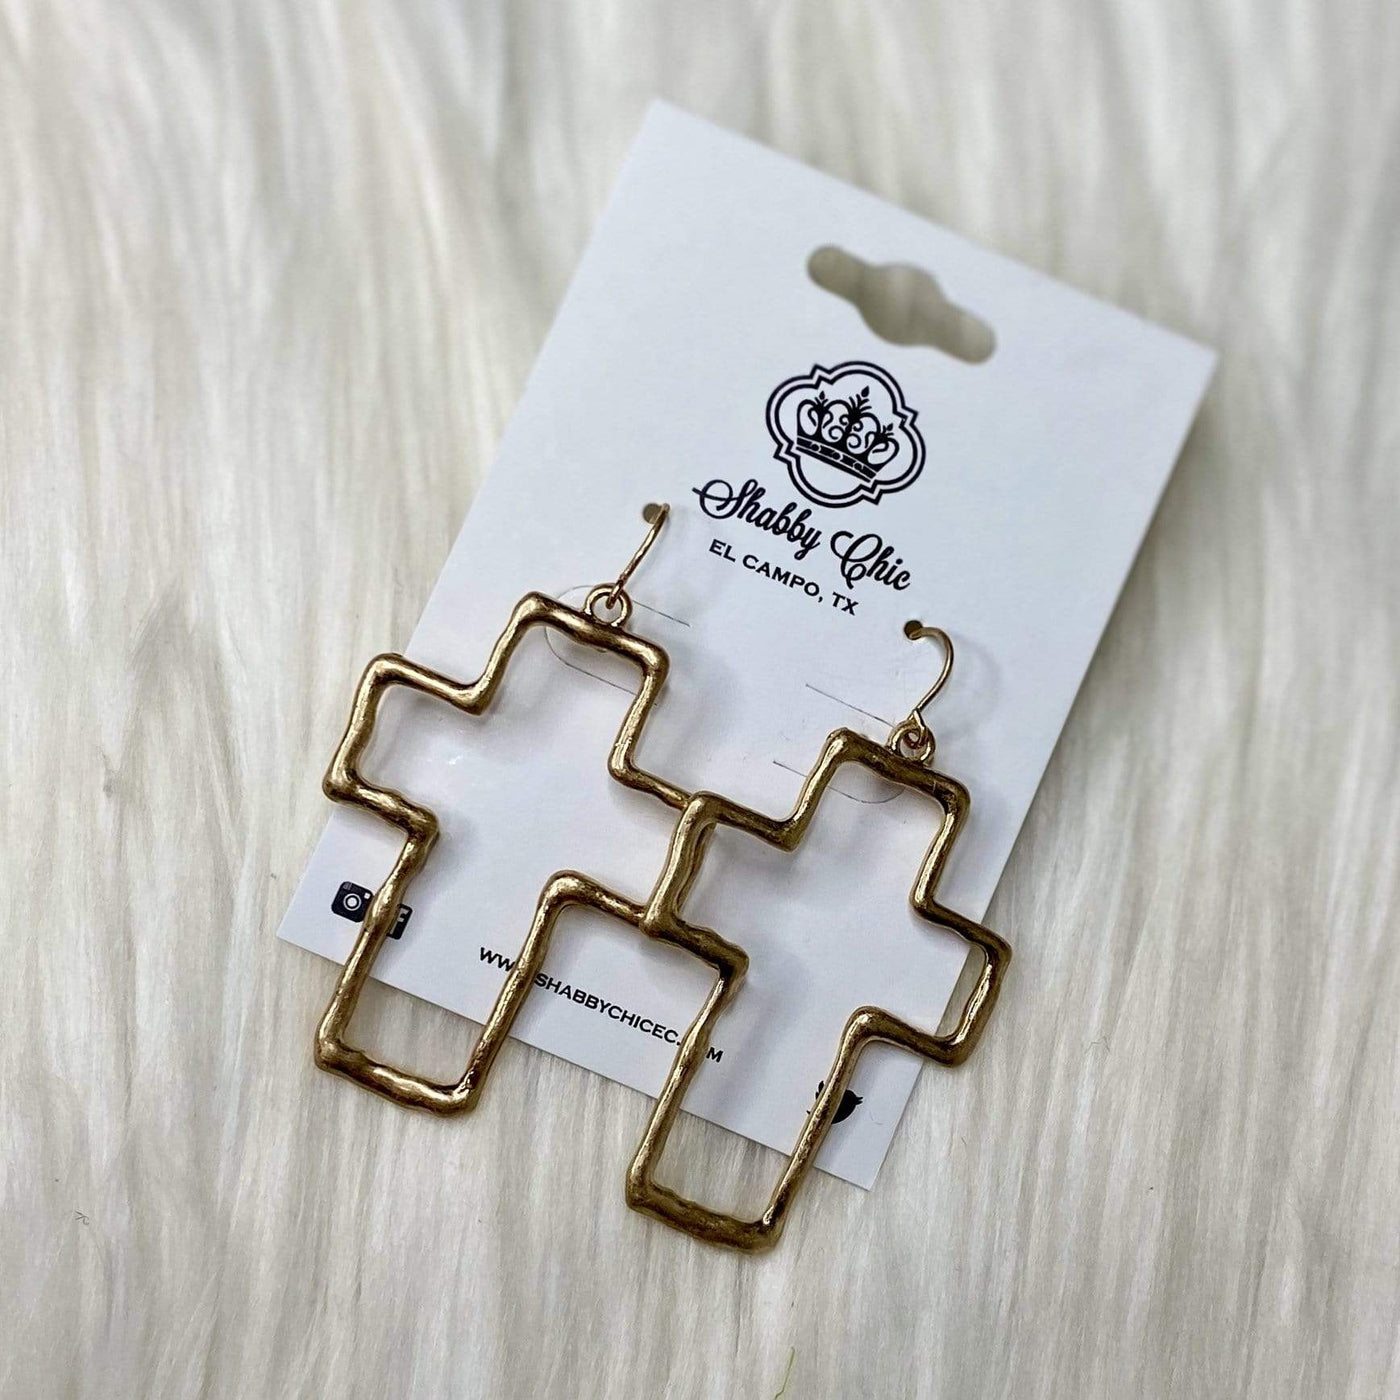 Open Cross earrings - Gold Shabby Chic Boutique and Tanning Salon